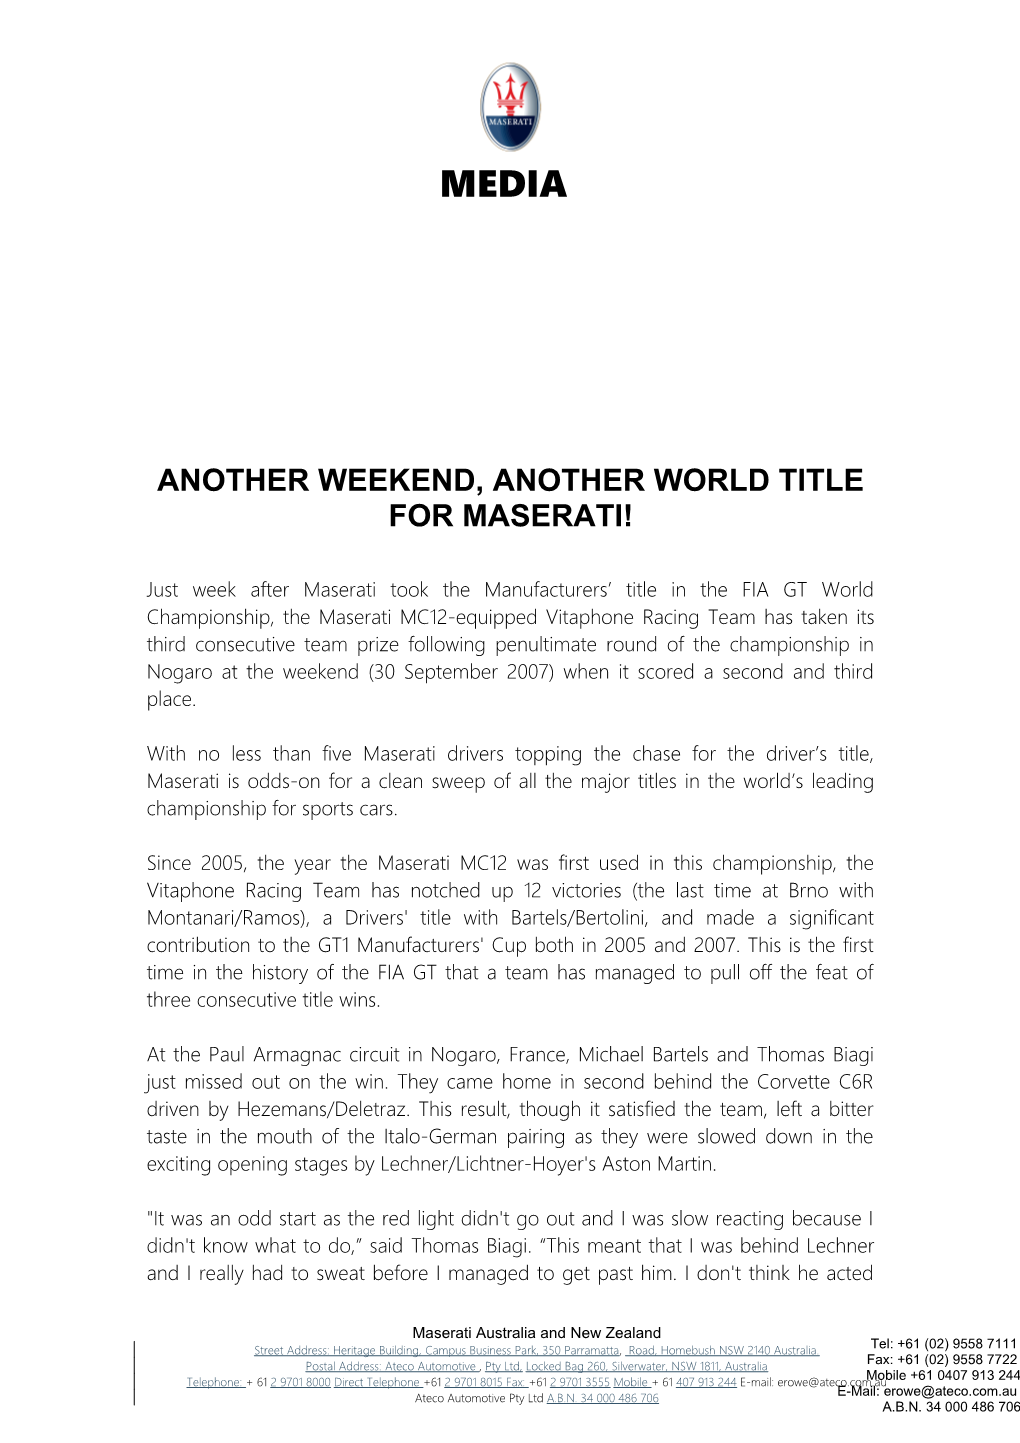 Another Weekend, Another World Title for Maserati!